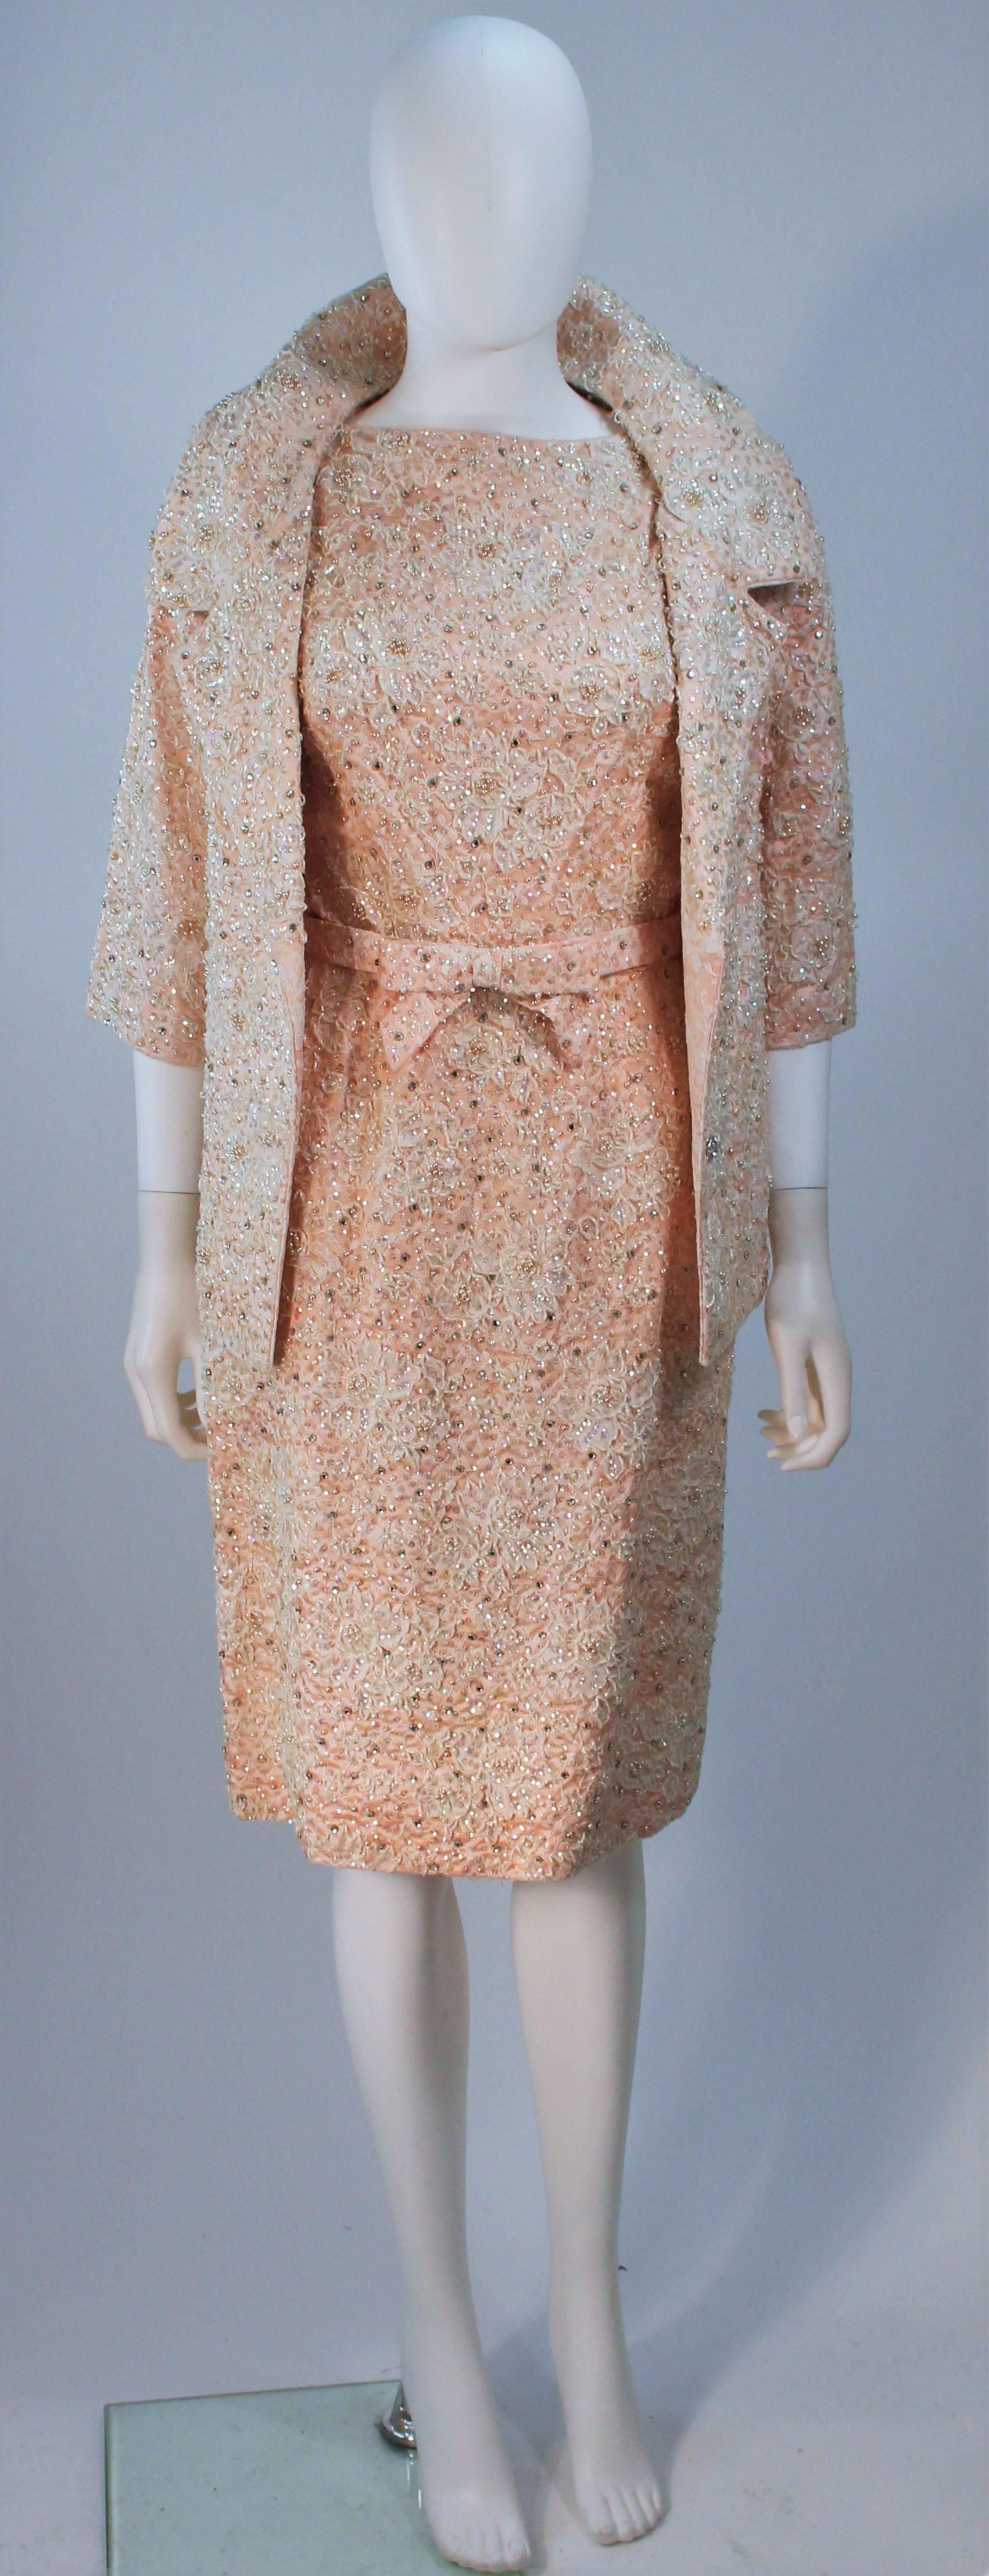  This Haute Couture Internationale  ensemble is composed of a beaded pink lace combination. Features a classic style dress, short jacket with center front rhinestone buttons, and a stylized belt. In excellent vintage condition with original tags.